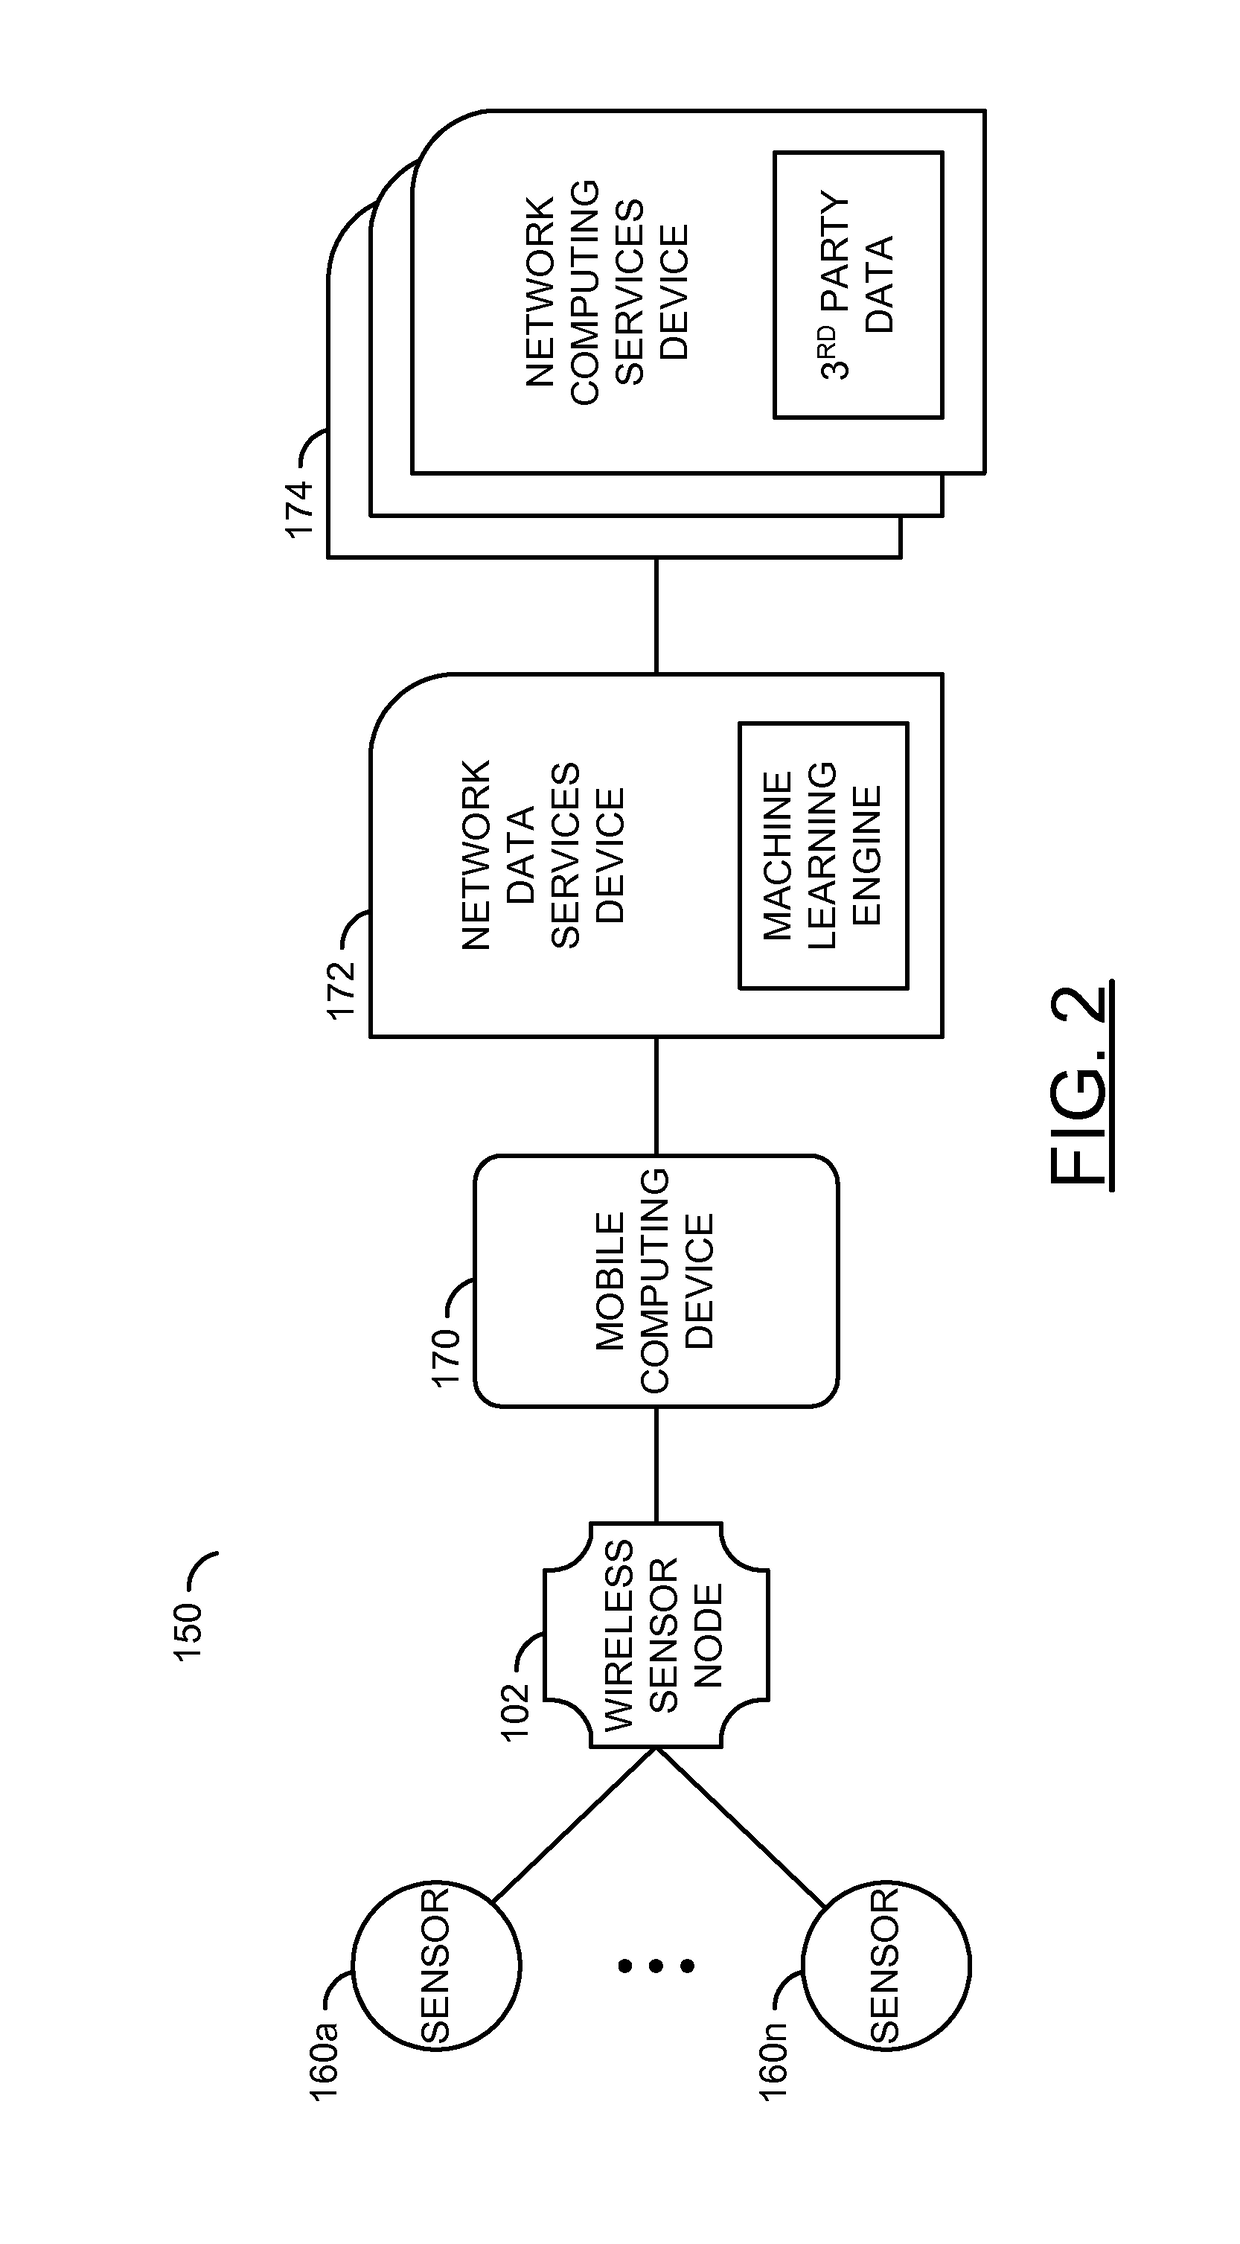 Smart security device with monitoring mode and communication mode